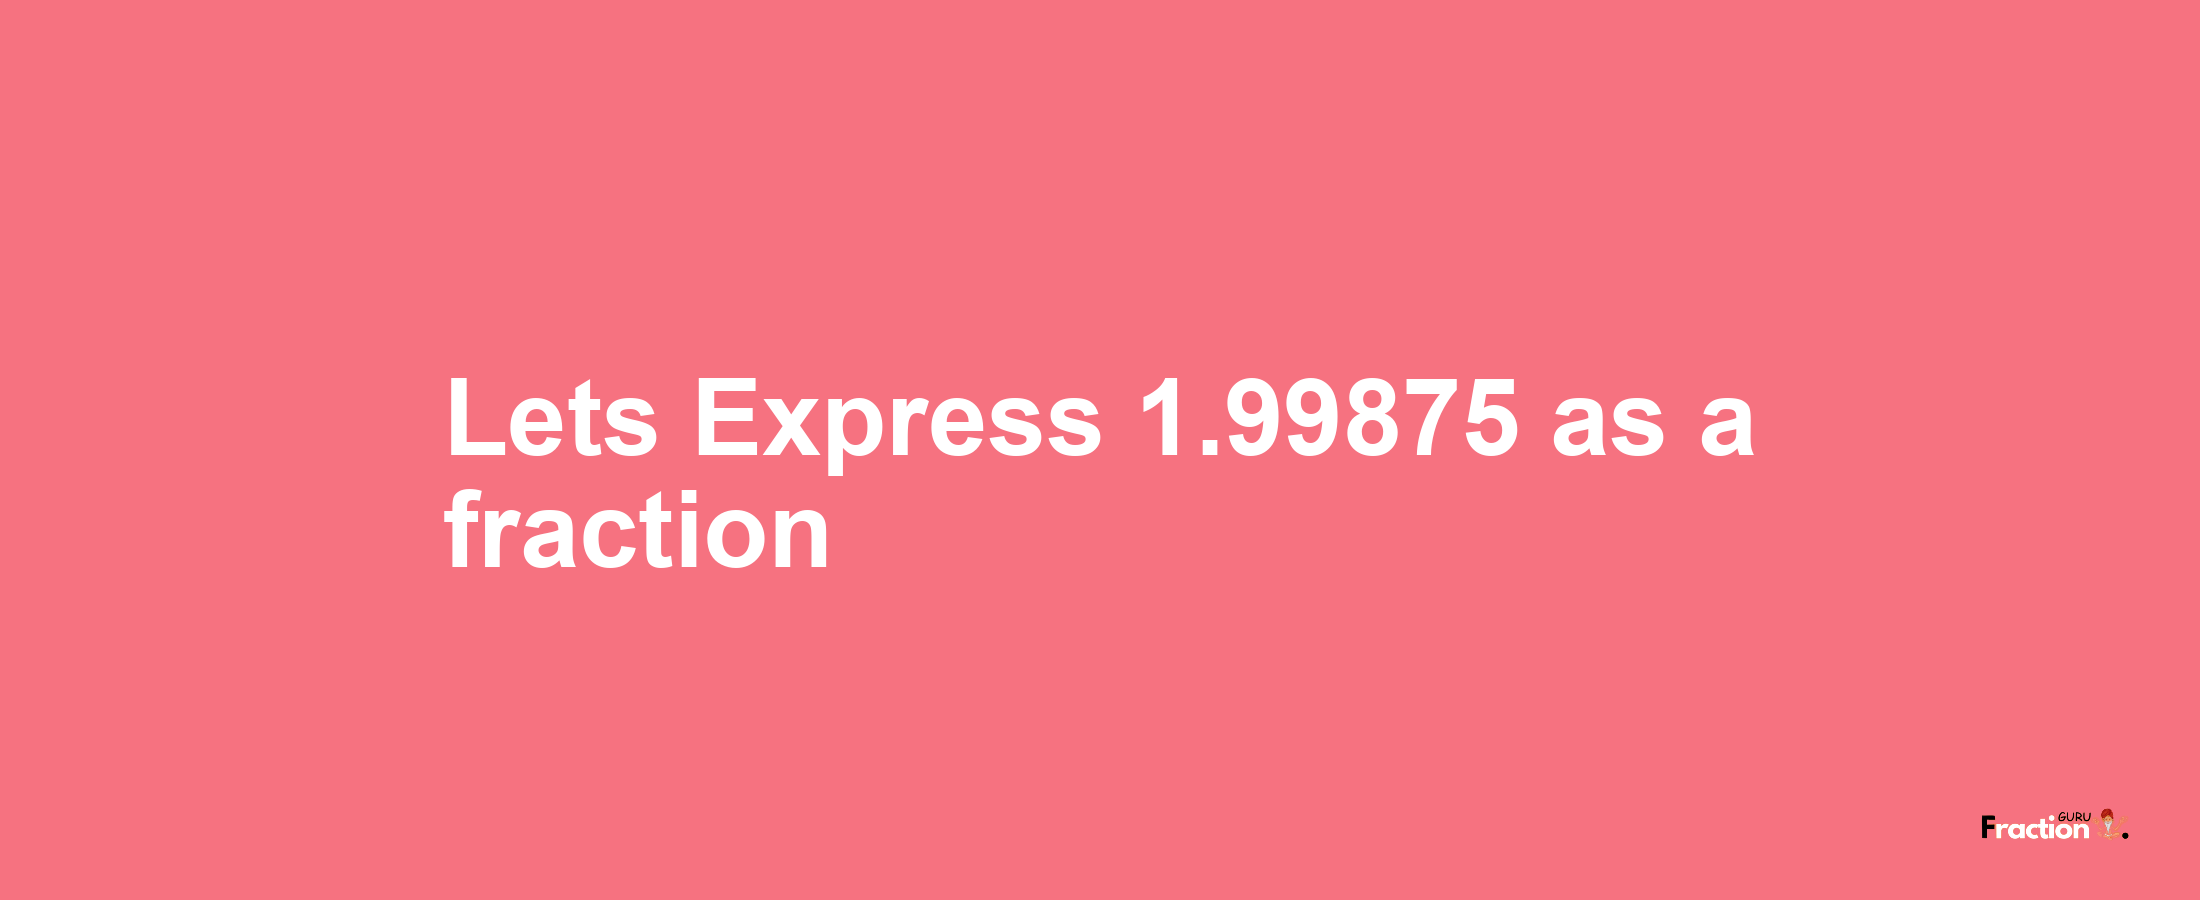 Lets Express 1.99875 as afraction